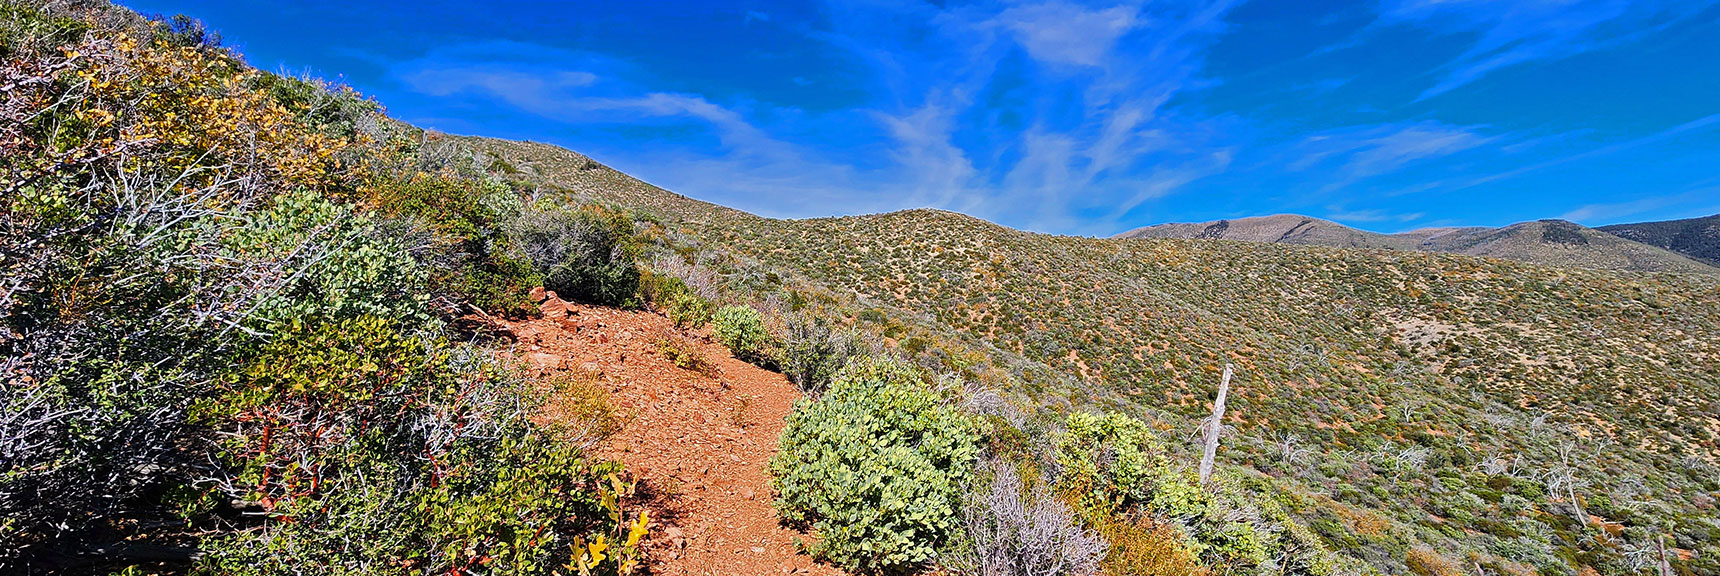 Loop Continues to a High Ridge. Will Descend Upper East (far) Side of Ridge to Lovell Canyon Base. | Griffith Shadow Loop | Lovell Canyon, Nevada